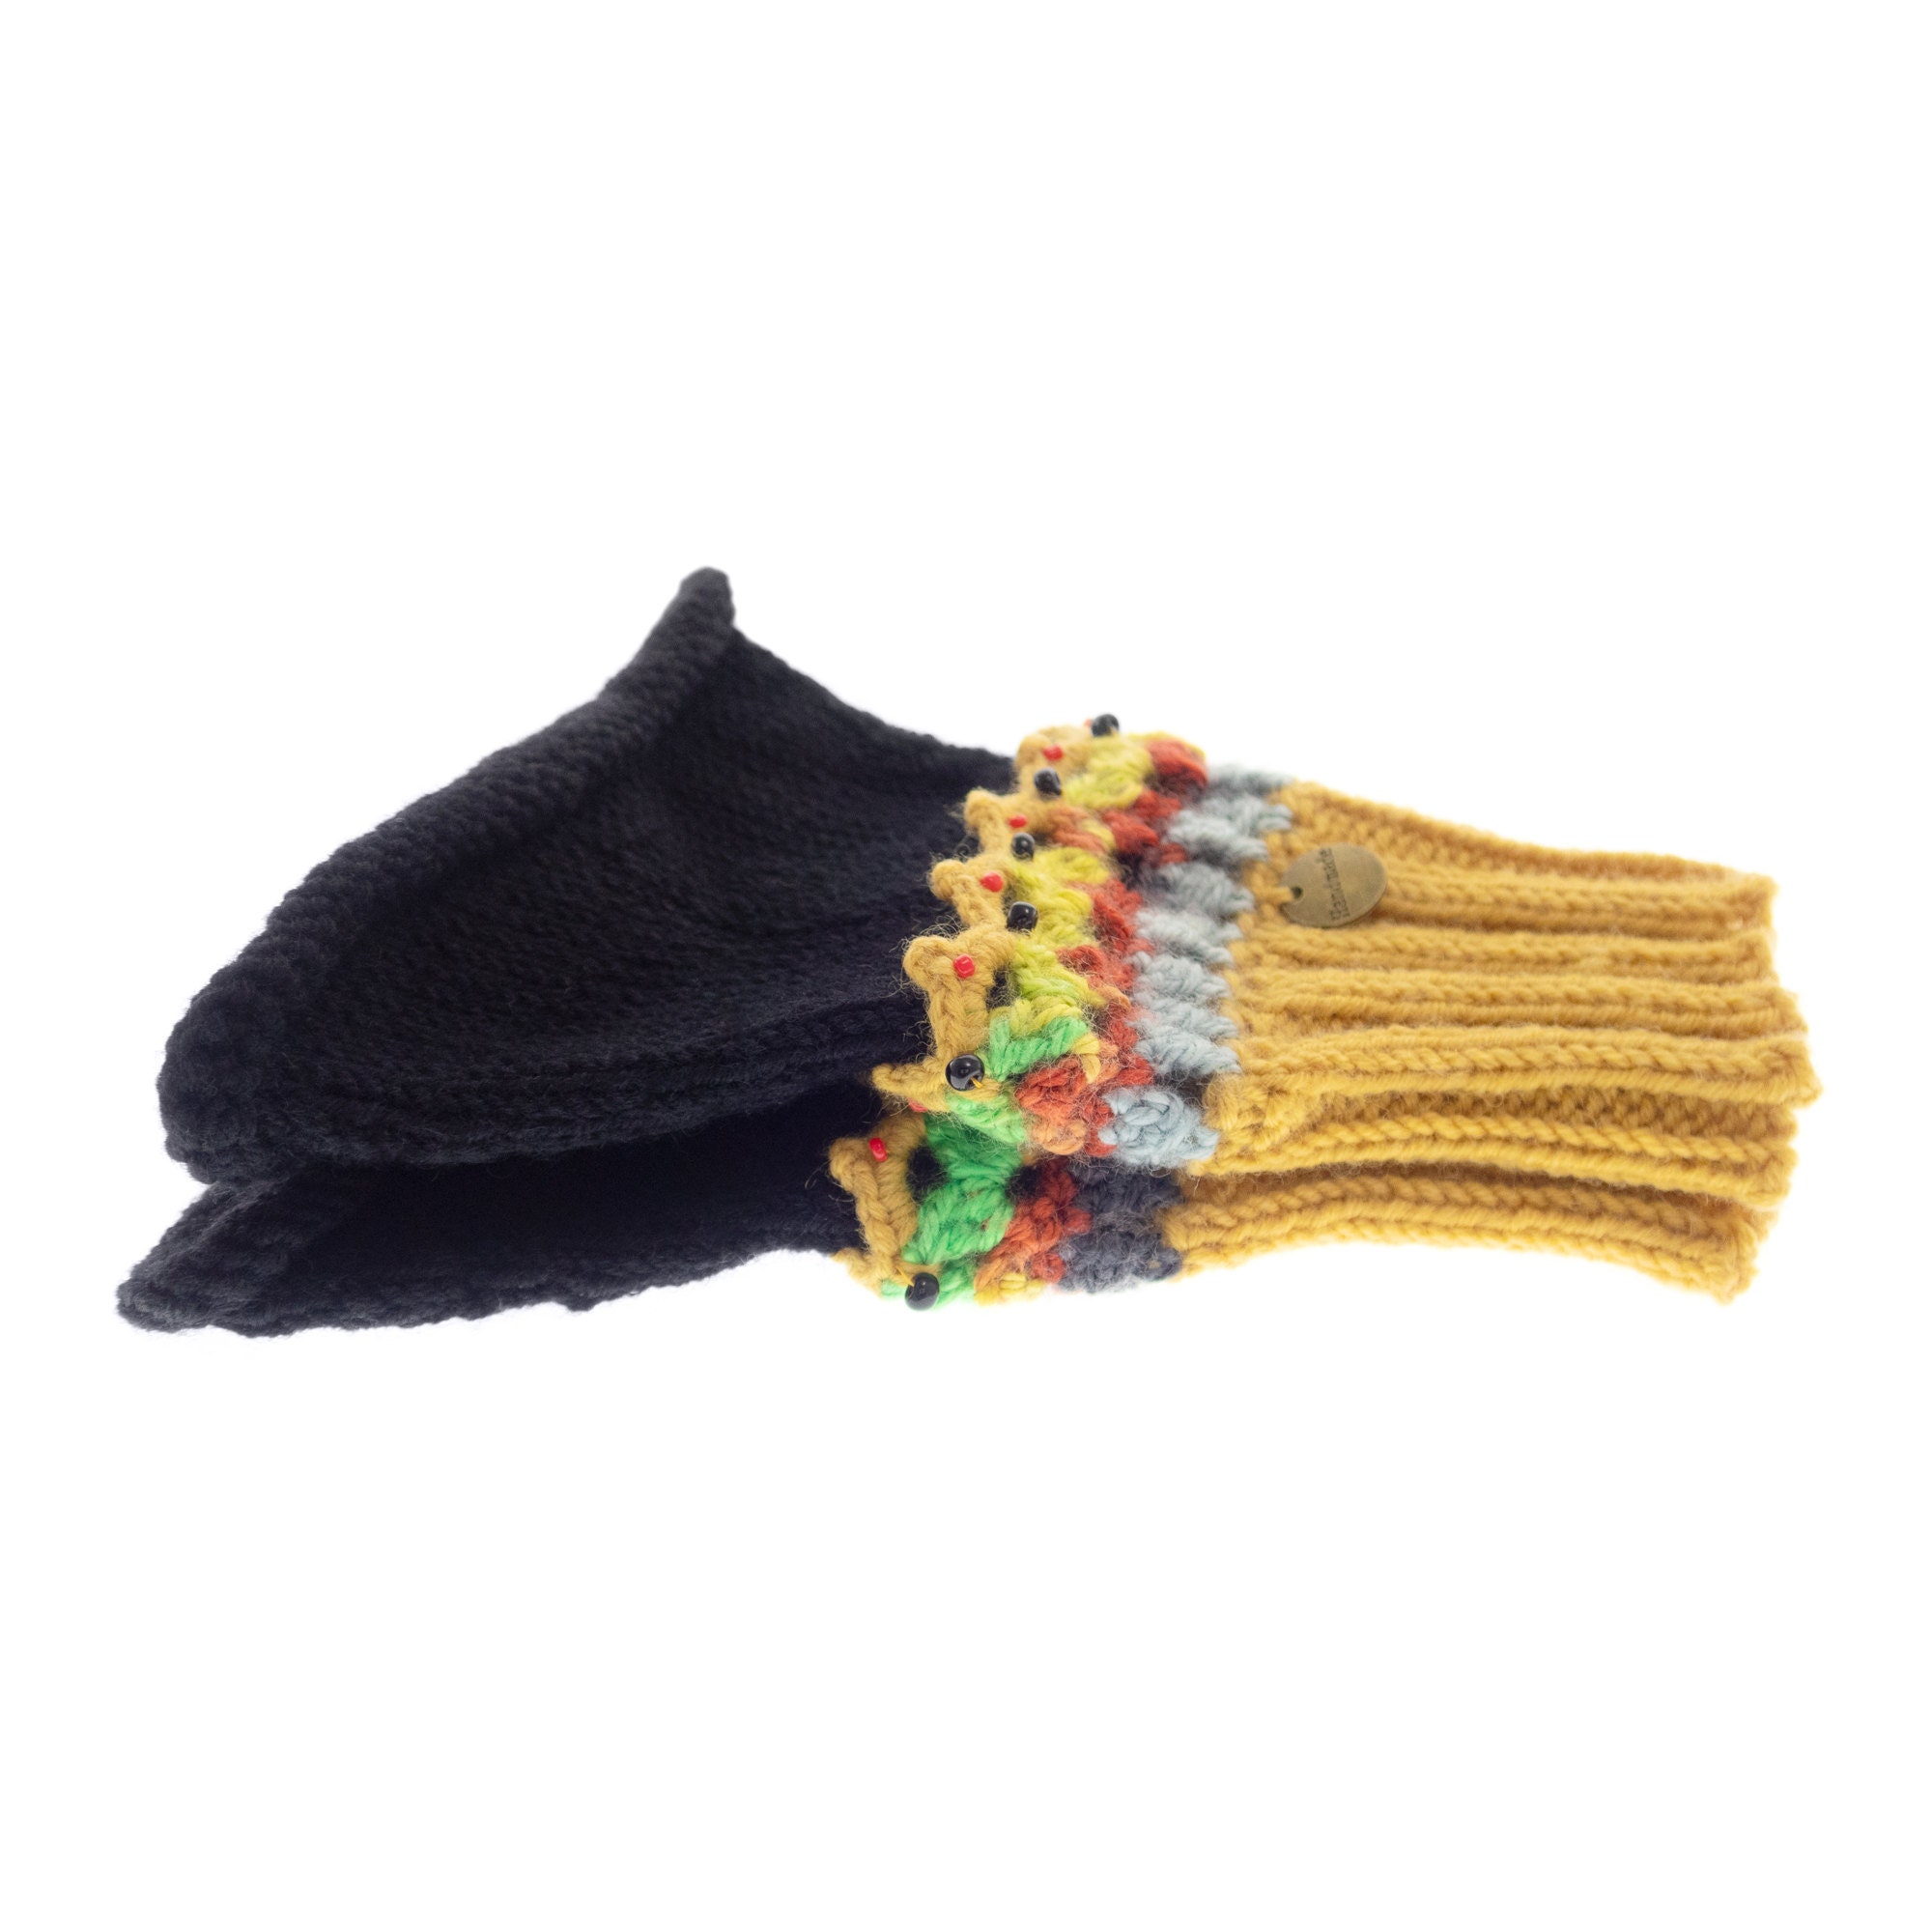 Mittens Knitted for Adults, Autumn Embroidered Gloves